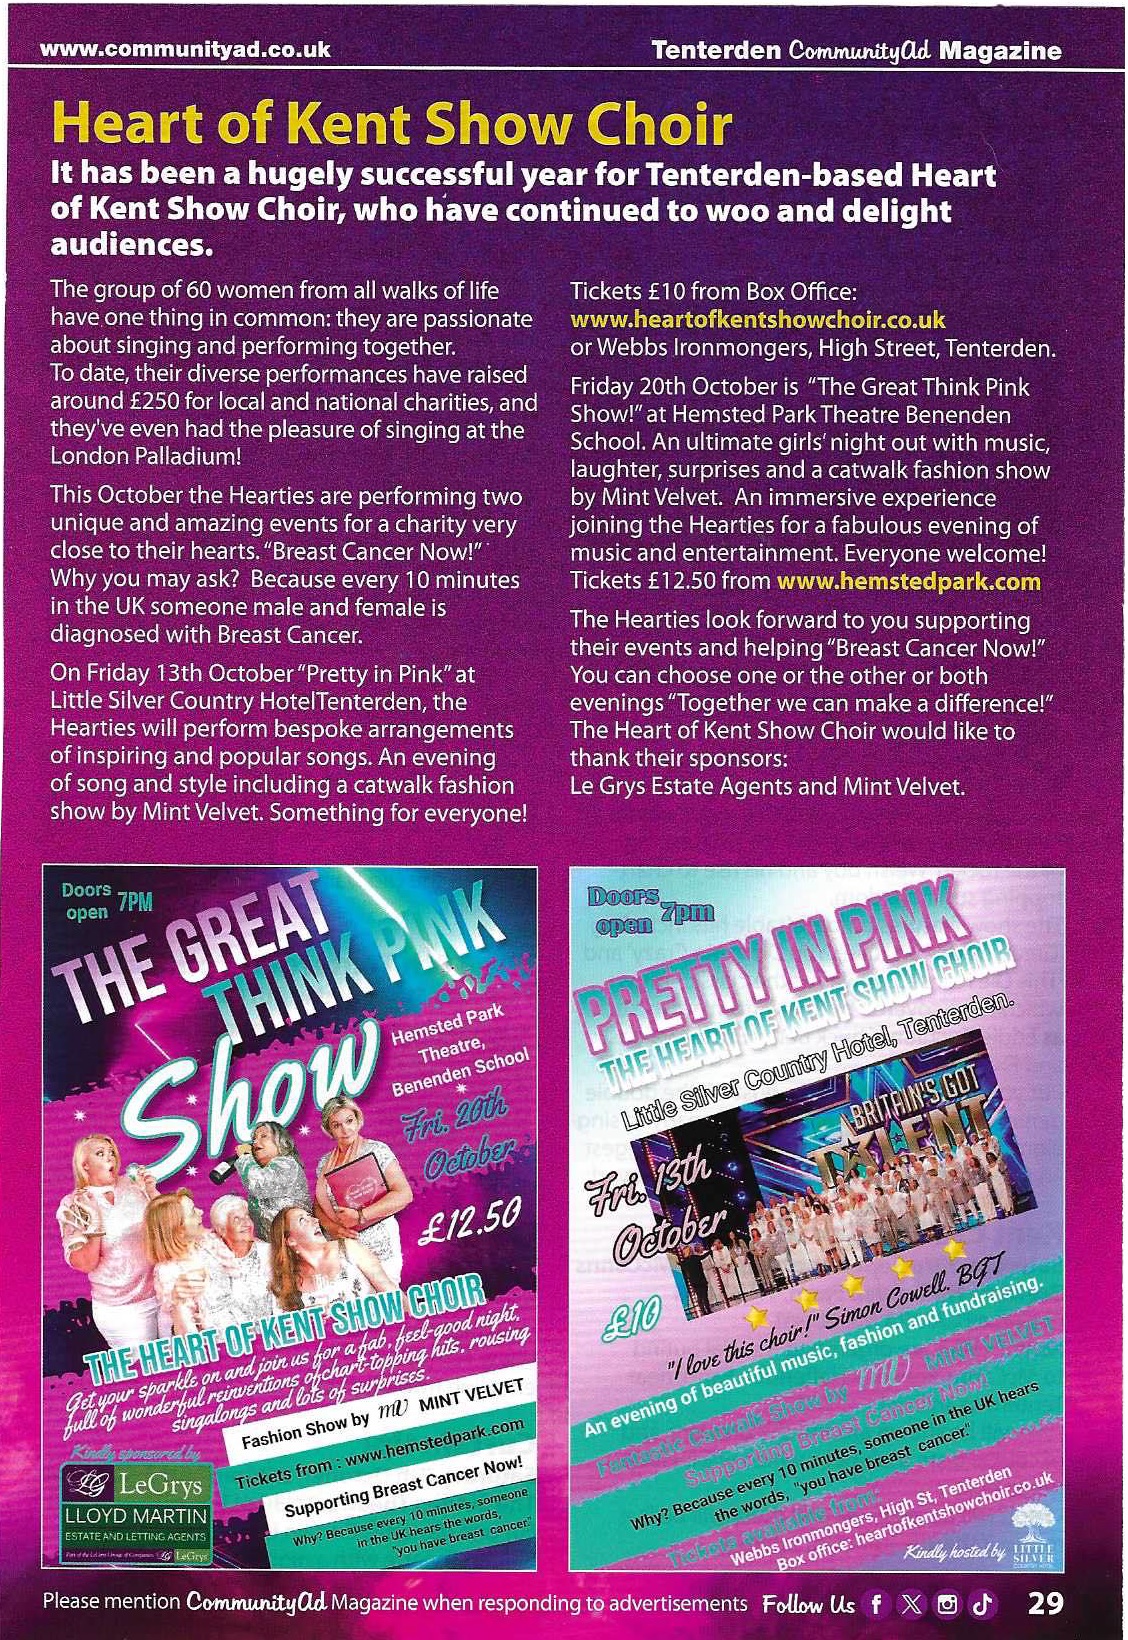 HEART OF KENT SHOW CHOIR FRIDAY 13TH OCTOBER AT THE LITTLE SILVER COUNTRY HOTEL 